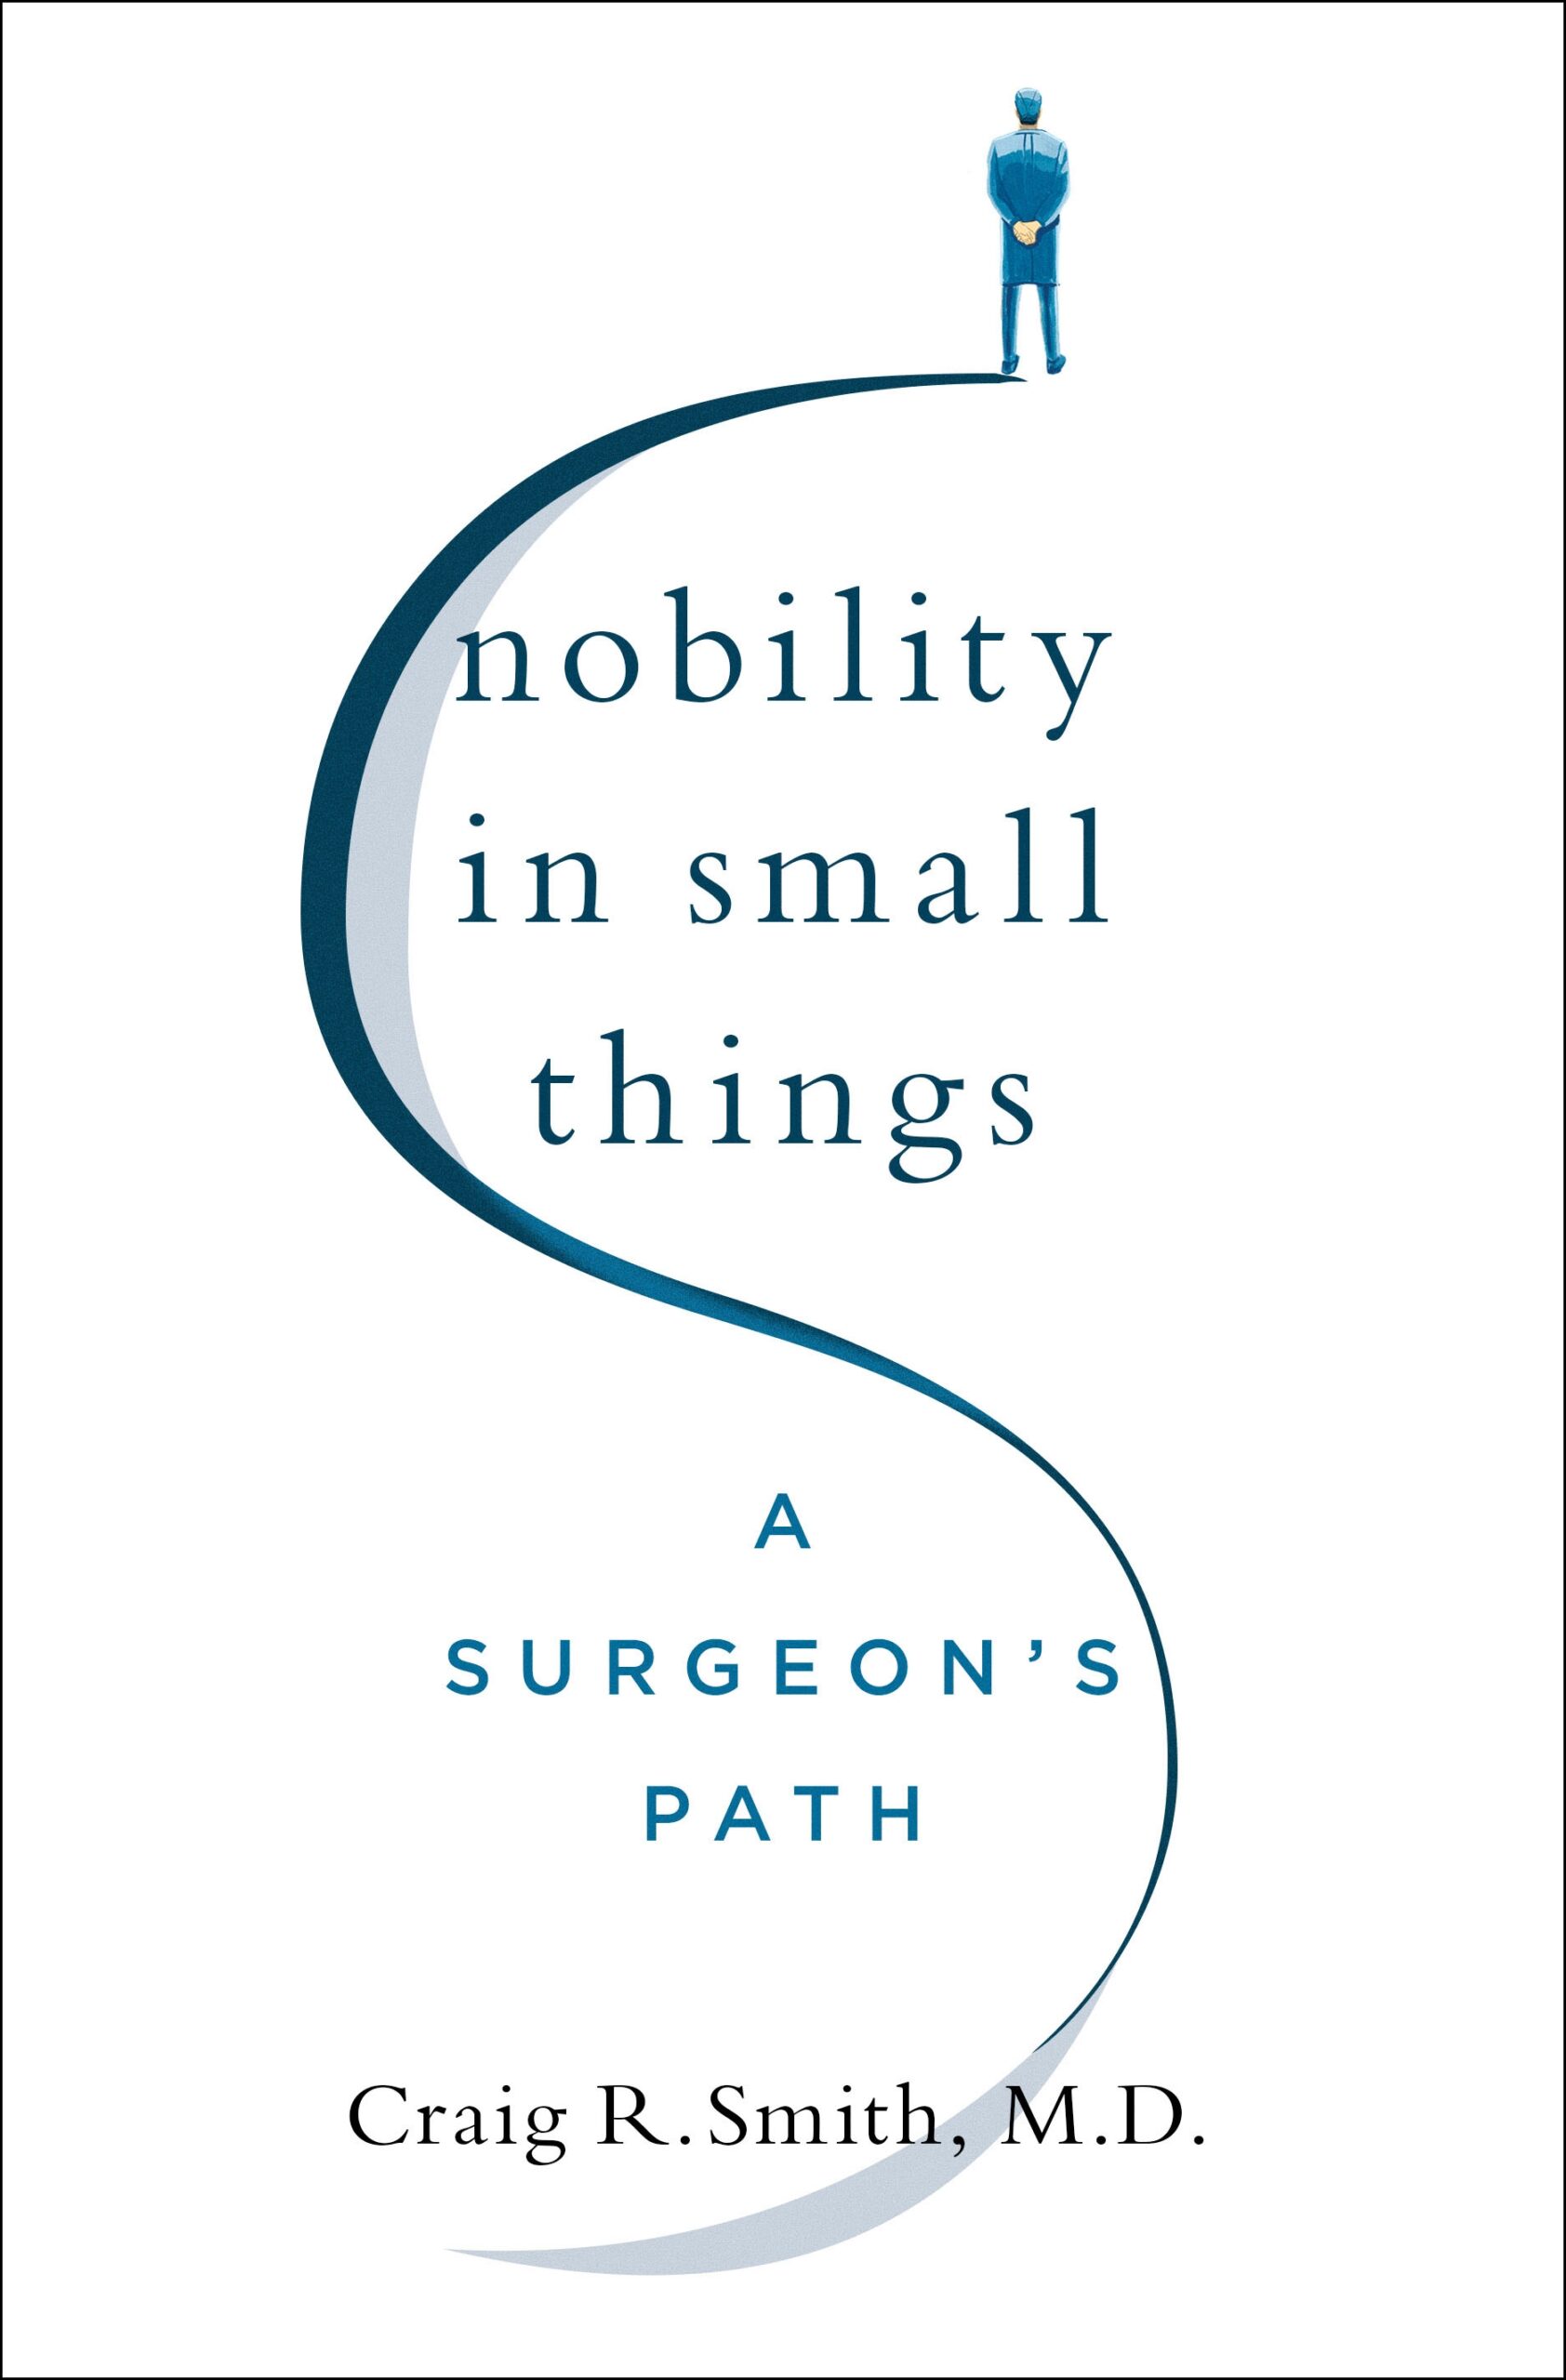 NOBILITY IN SMALL THINGS by Craig R. Smith, MD